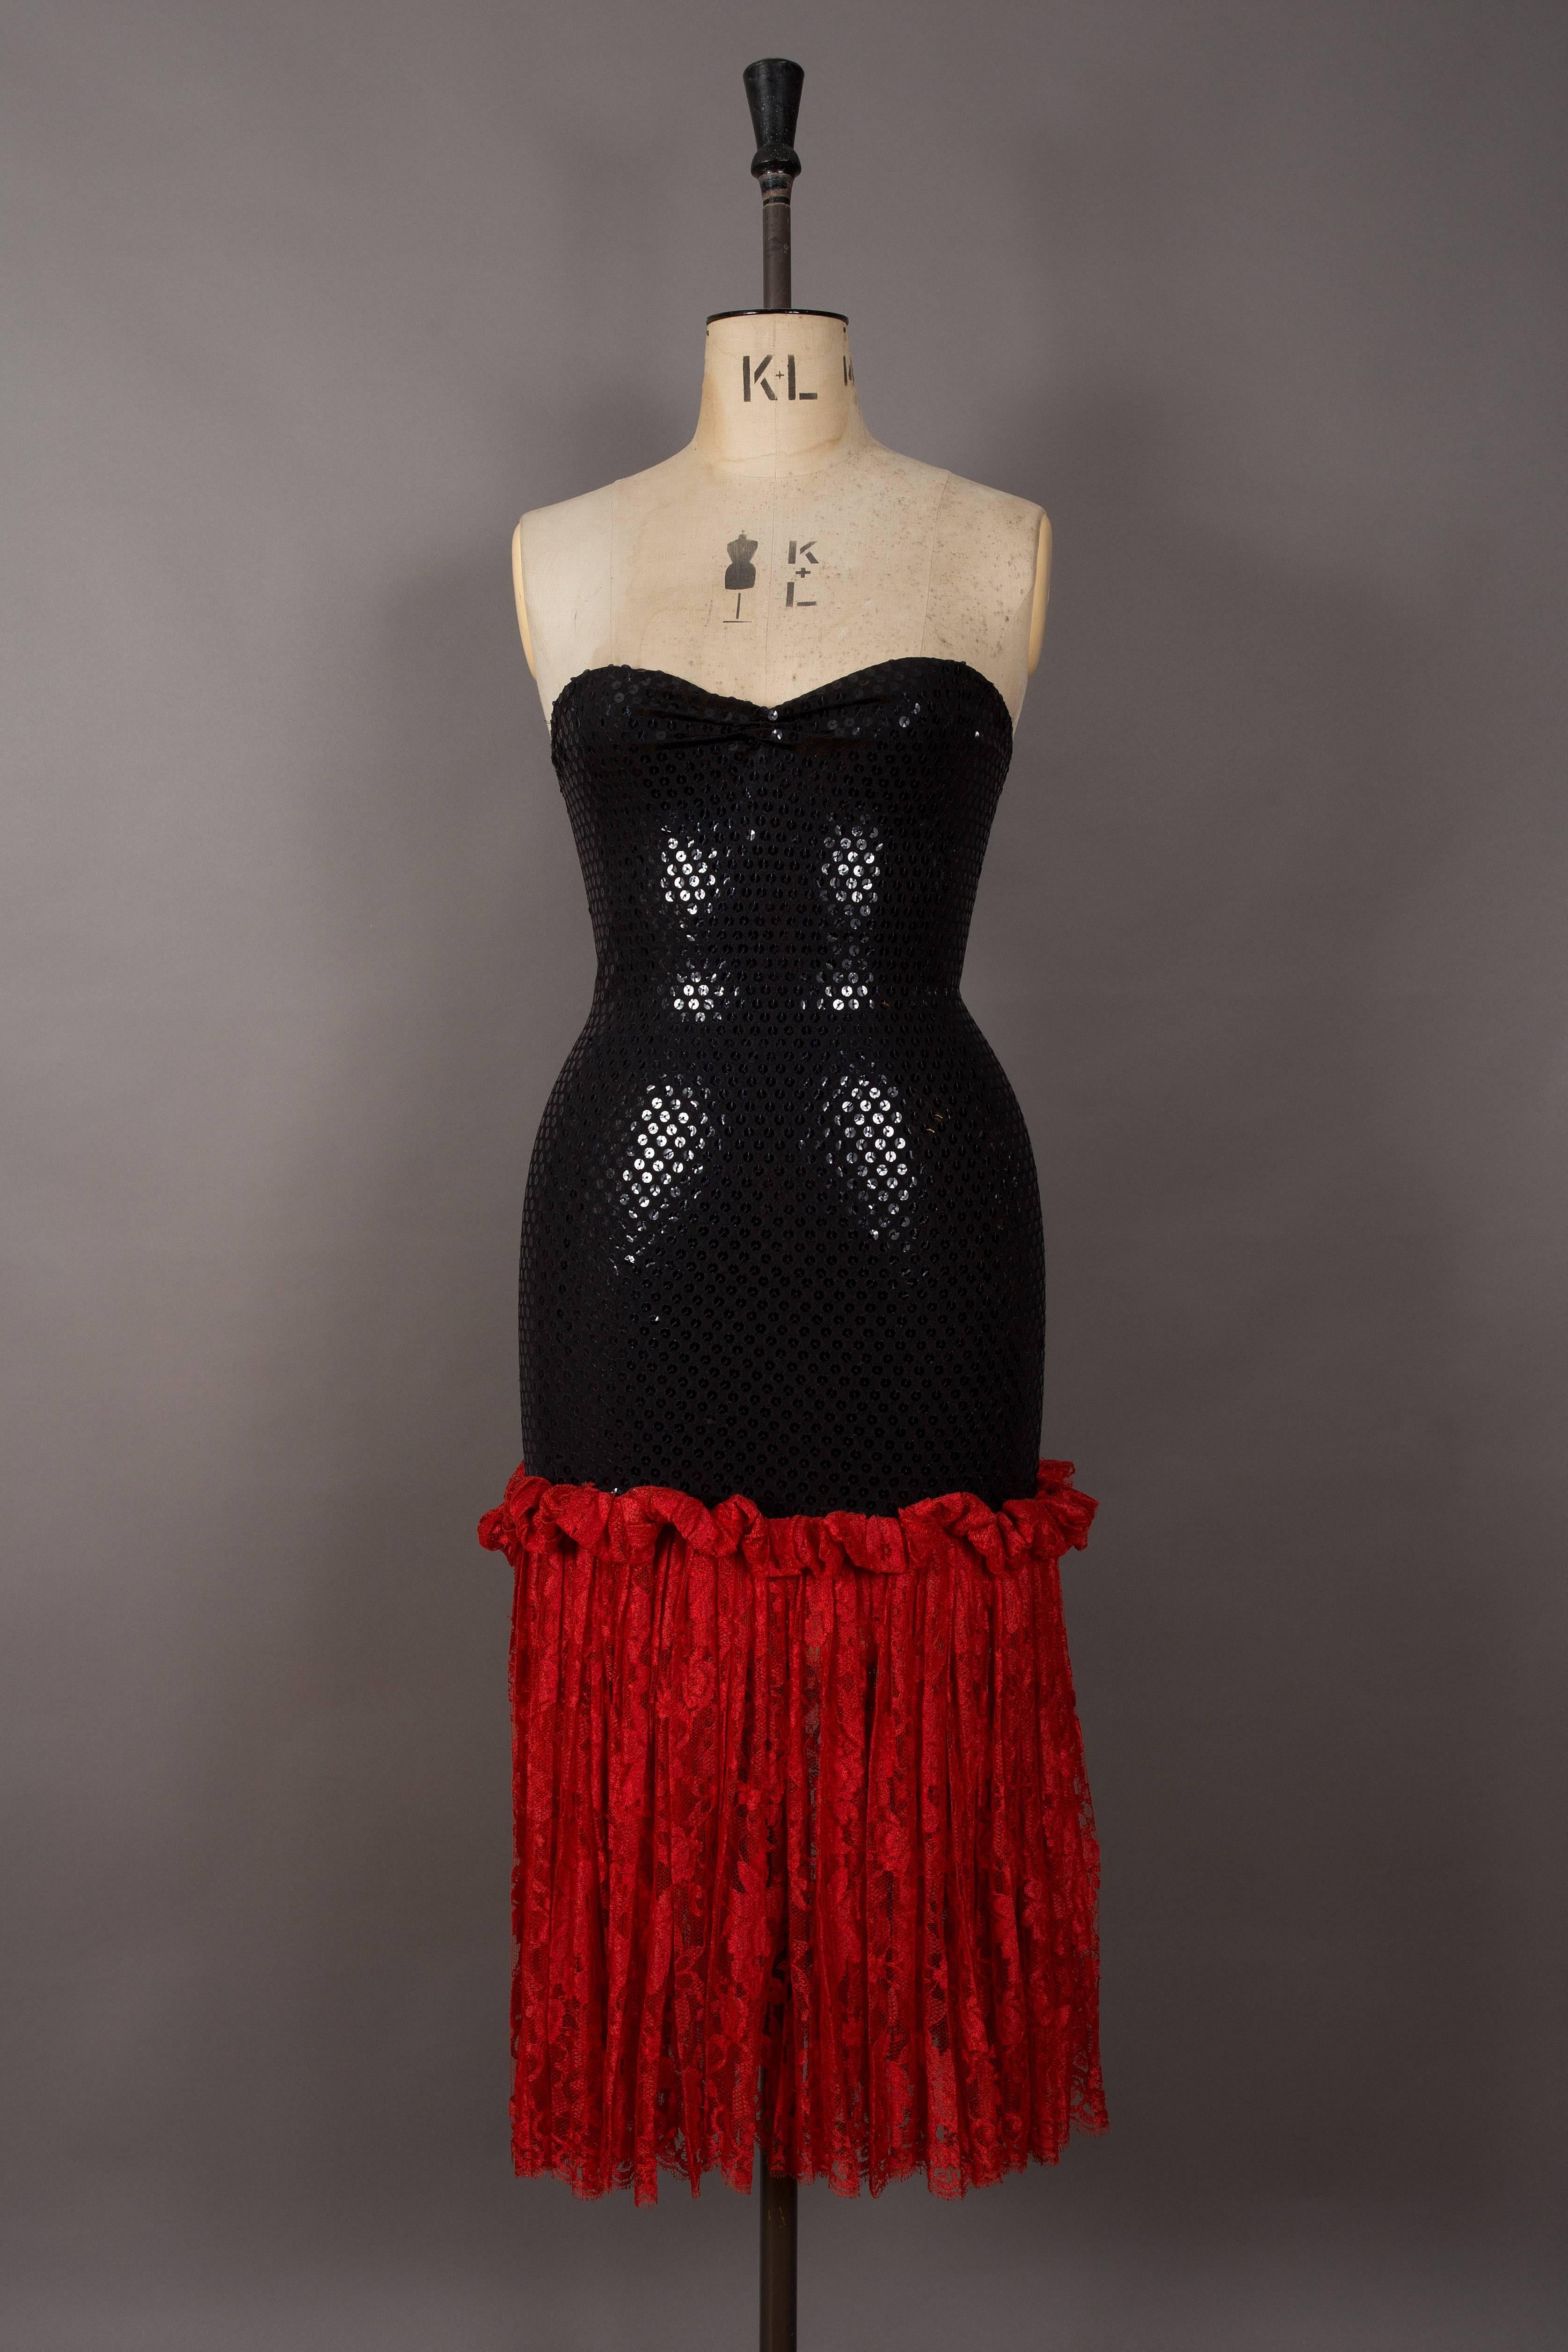 Bastet strapless sequin cocktail dress, circa late 1970s. Black stretch knit decorated in sequins and pleated semi-sheer red lace skirt.